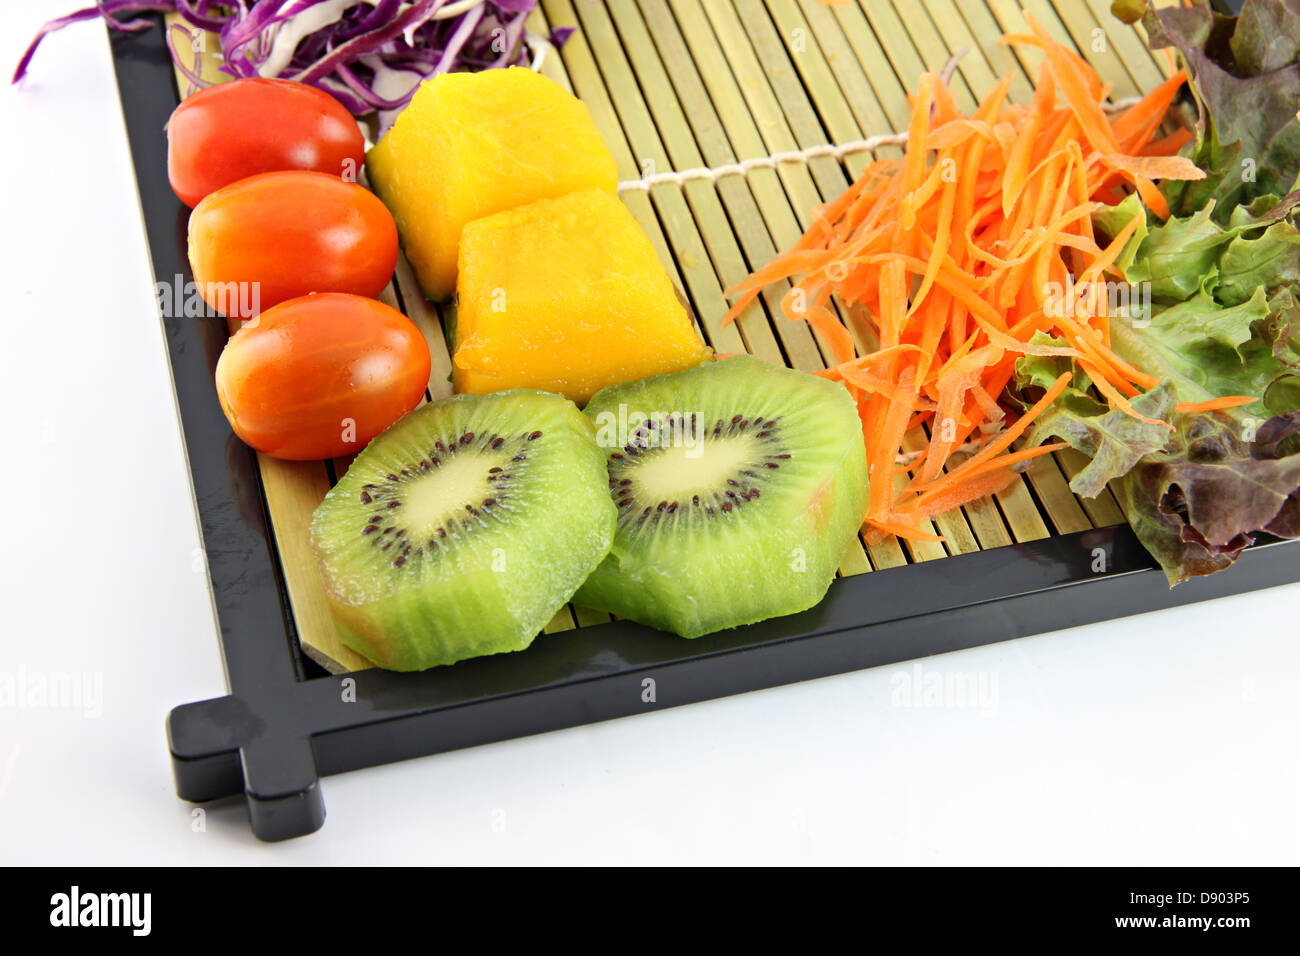 The Set of fruits and vegetables for health on the white background. Stock Photo